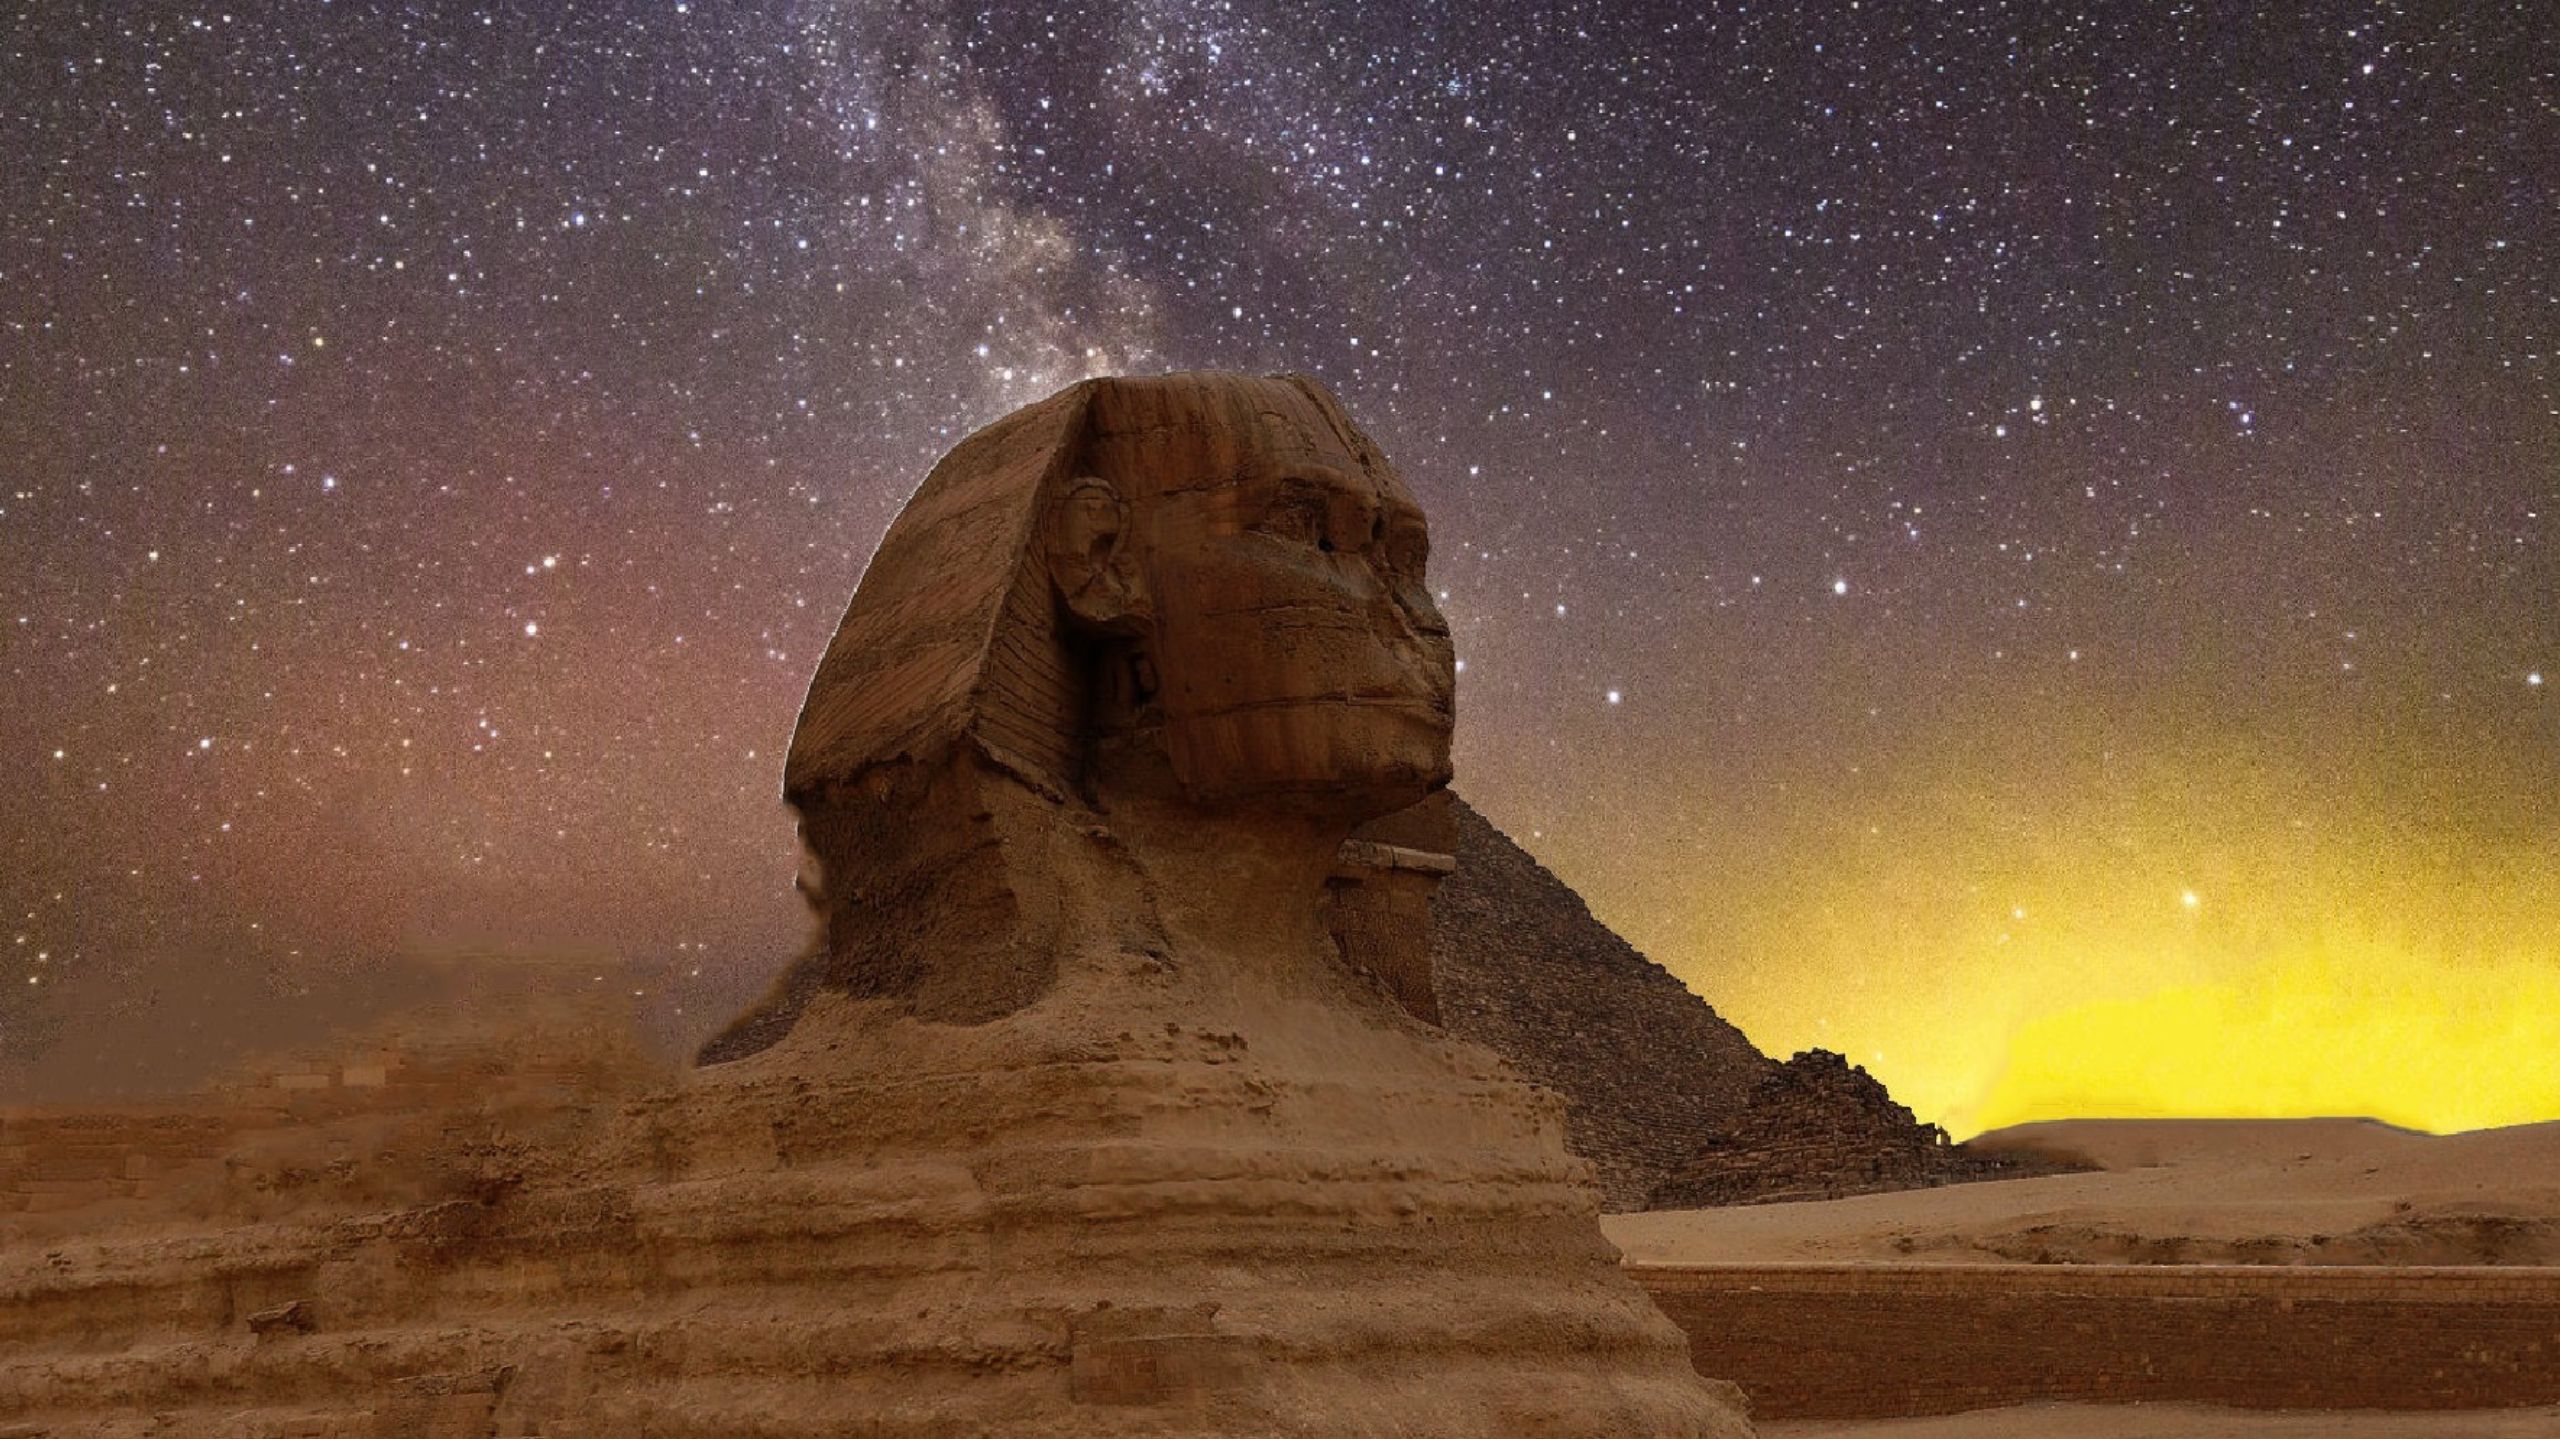 FAQ and Facts about Sphinx Egypt